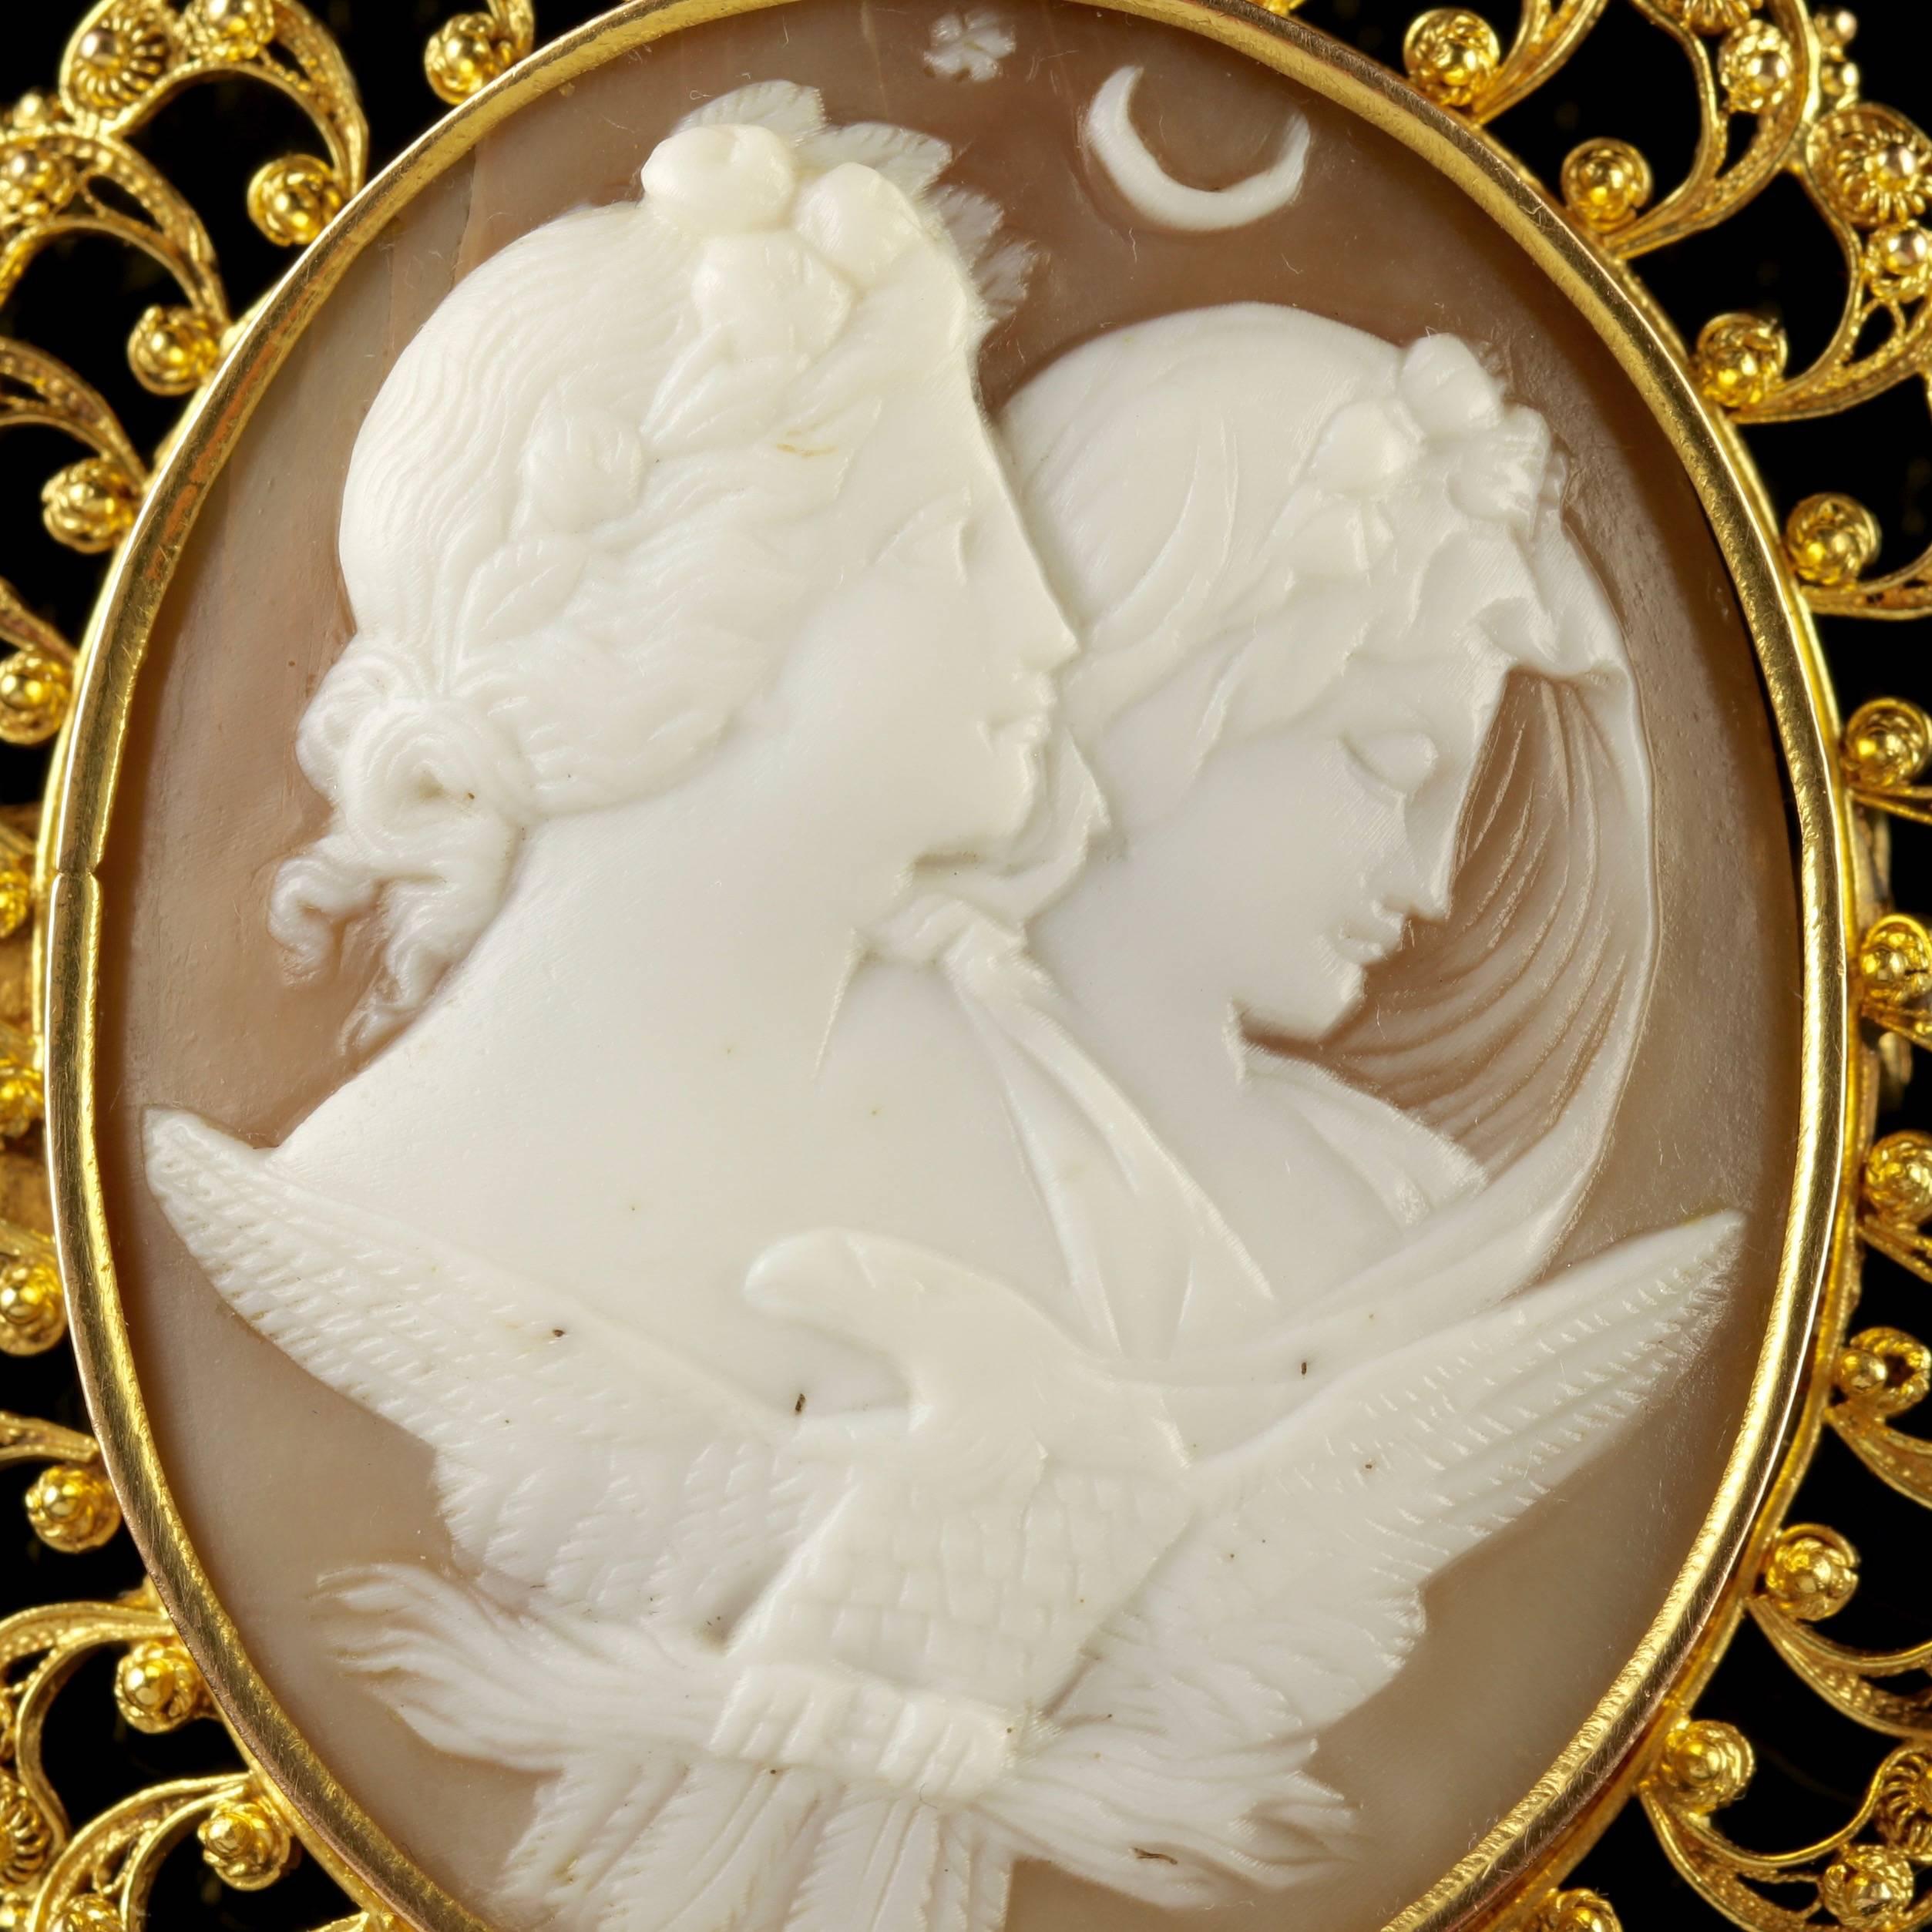 To read more please click continue reading below-

This genuine antique Victorian 18ct Yellow Gold night and day brooch is circa 1880.

Set with lovely detail, this fabulous Cameo depicts the Greek mythological scene night and day in which Nyx -